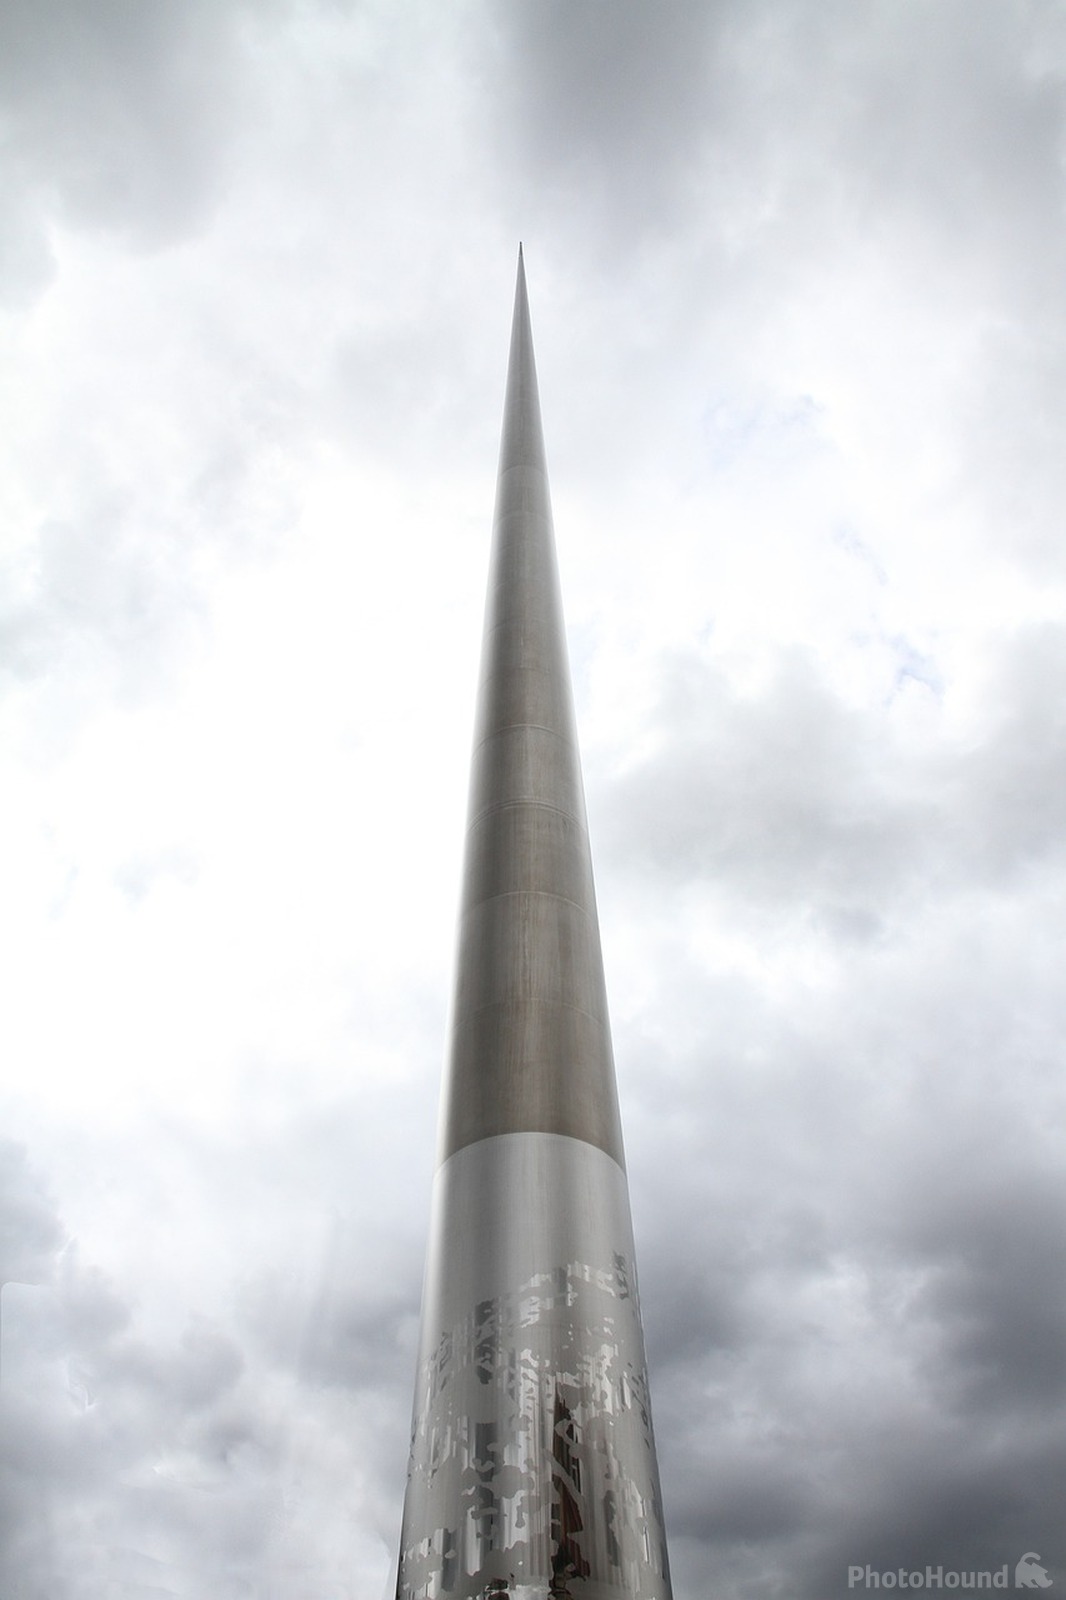 Image of The Spire of Dublin by Team PhotoHound